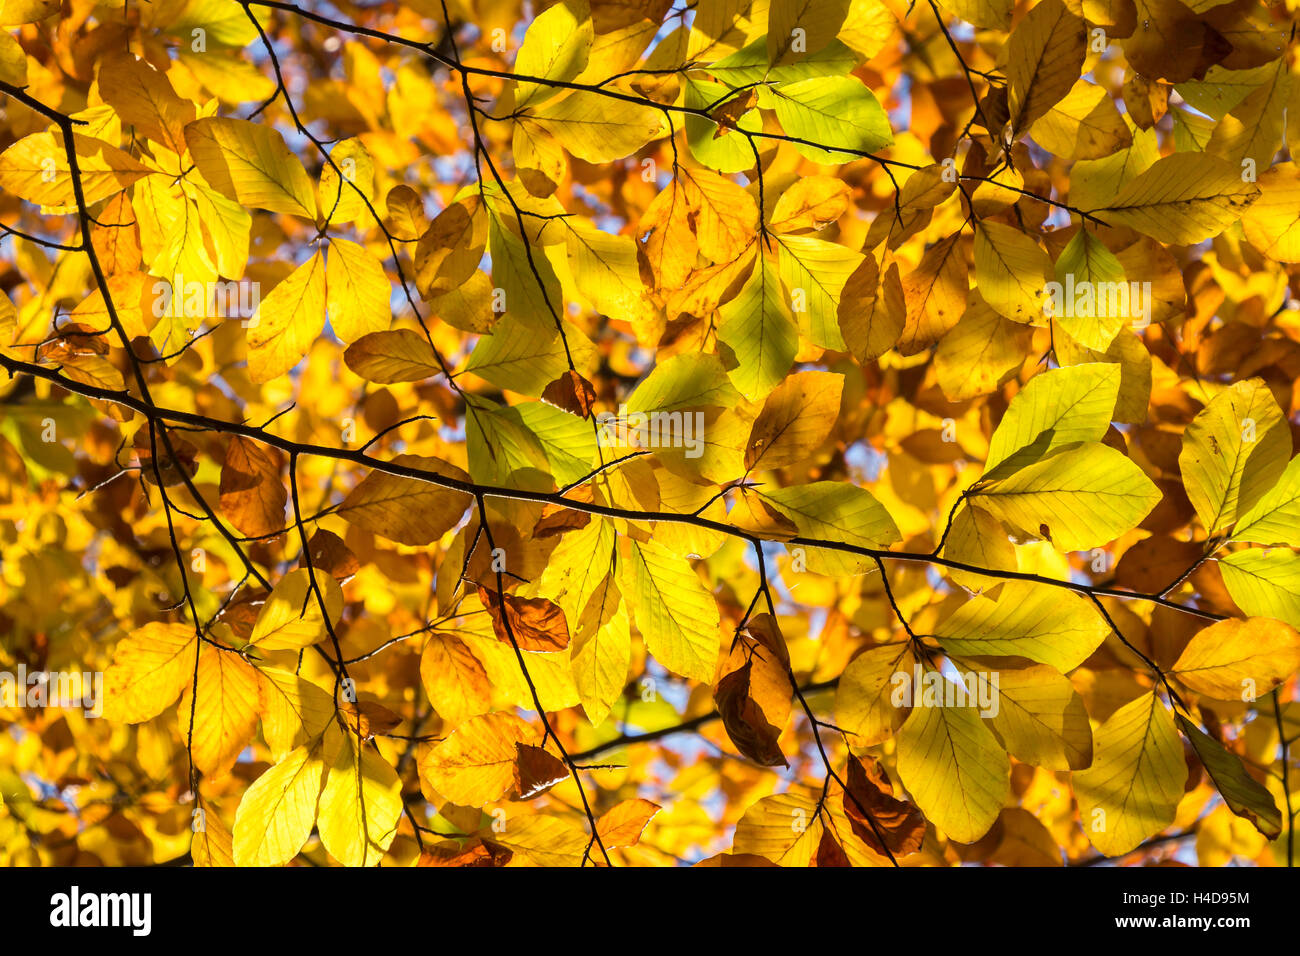 Yellow and Orange Autumn Leaves as Background Stock Photo